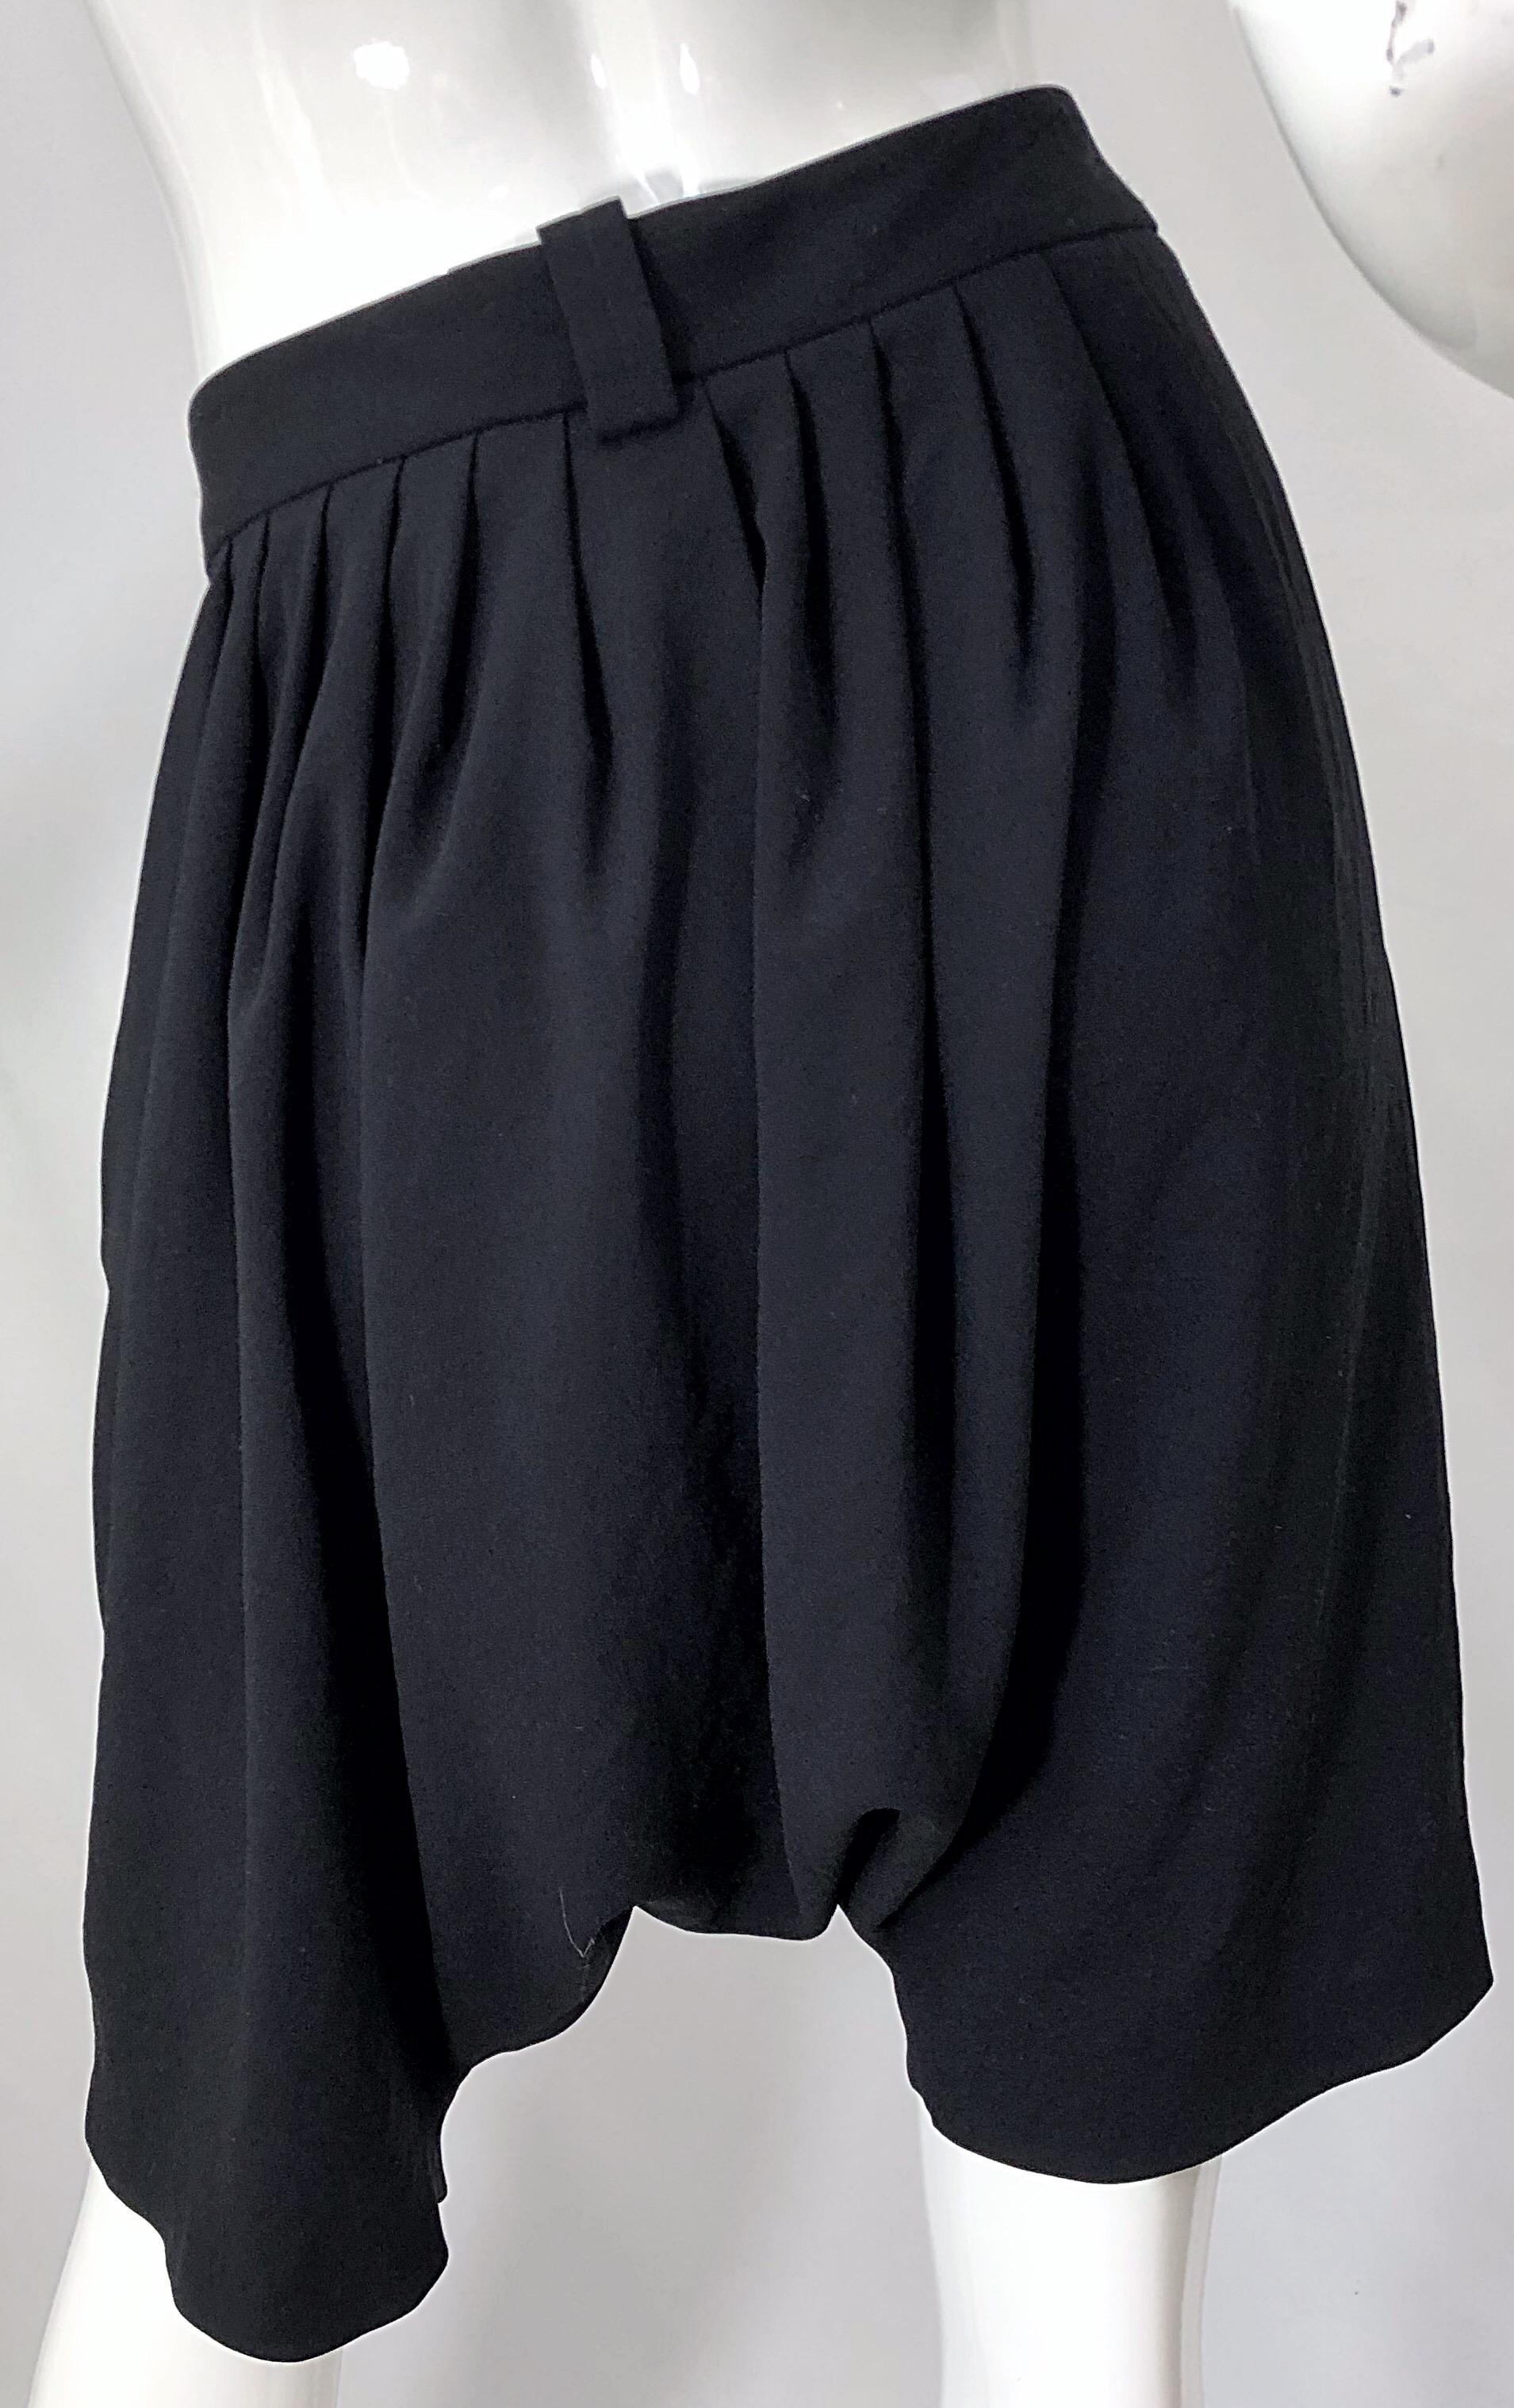 NWT Givenchy by Clare Waight Keller Size 40 / 8 Black Drop Crotch / Waist Shorts For Sale 3